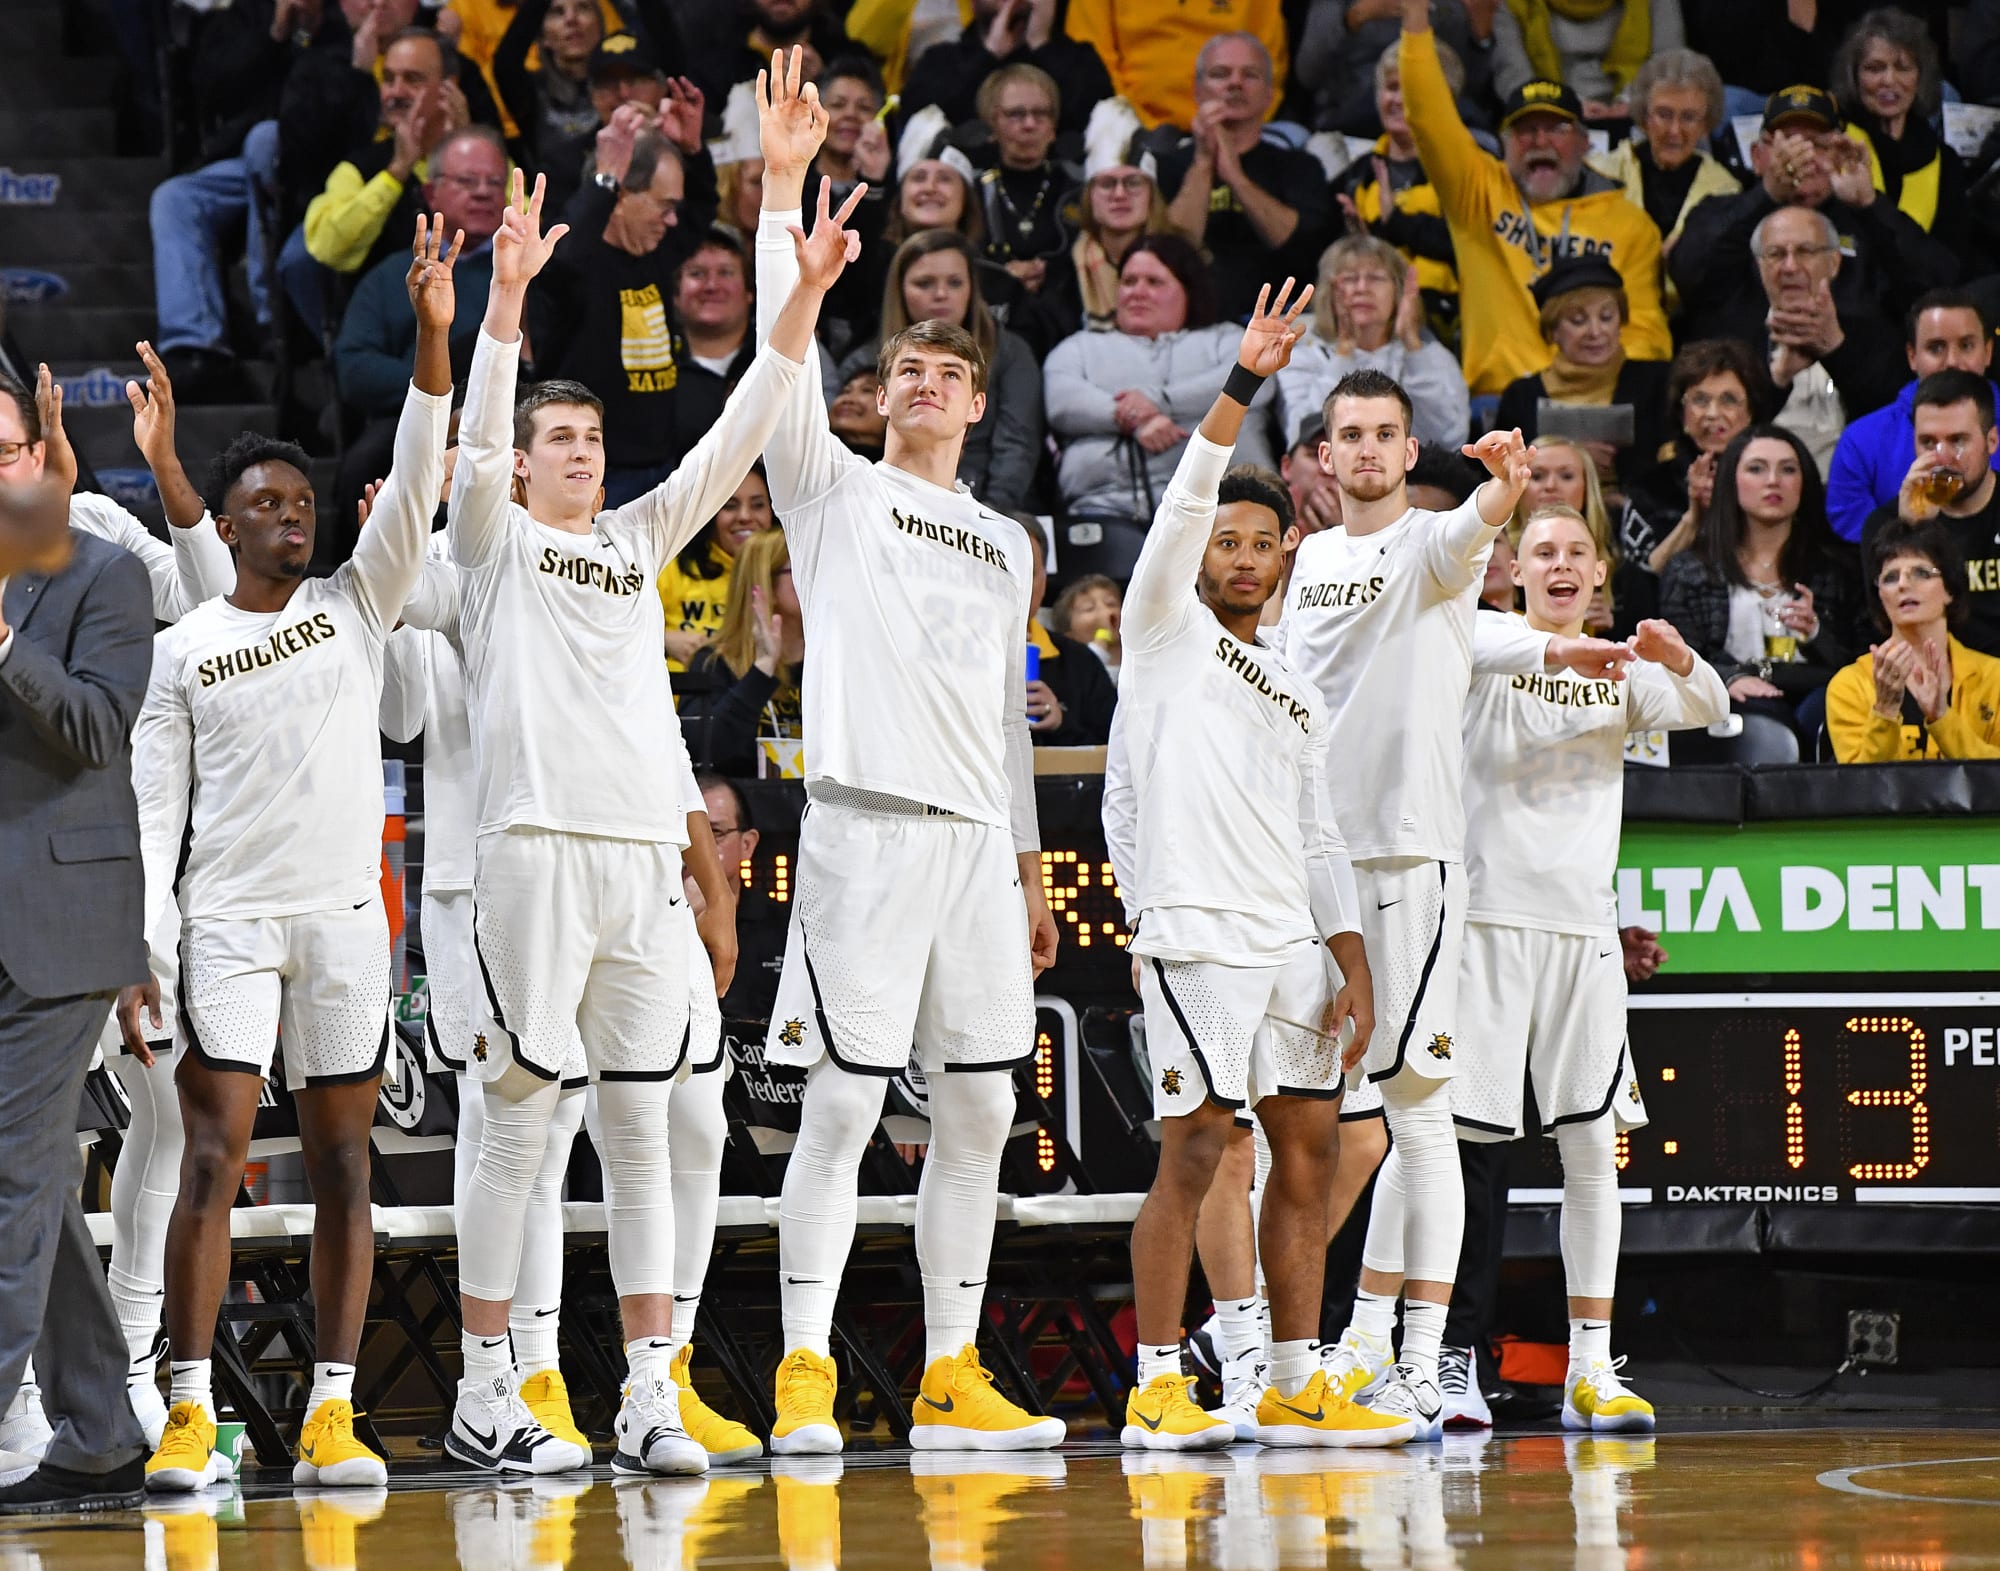 Wichita State Basketball: A Quick Glance Behind and a Long Road Ahead